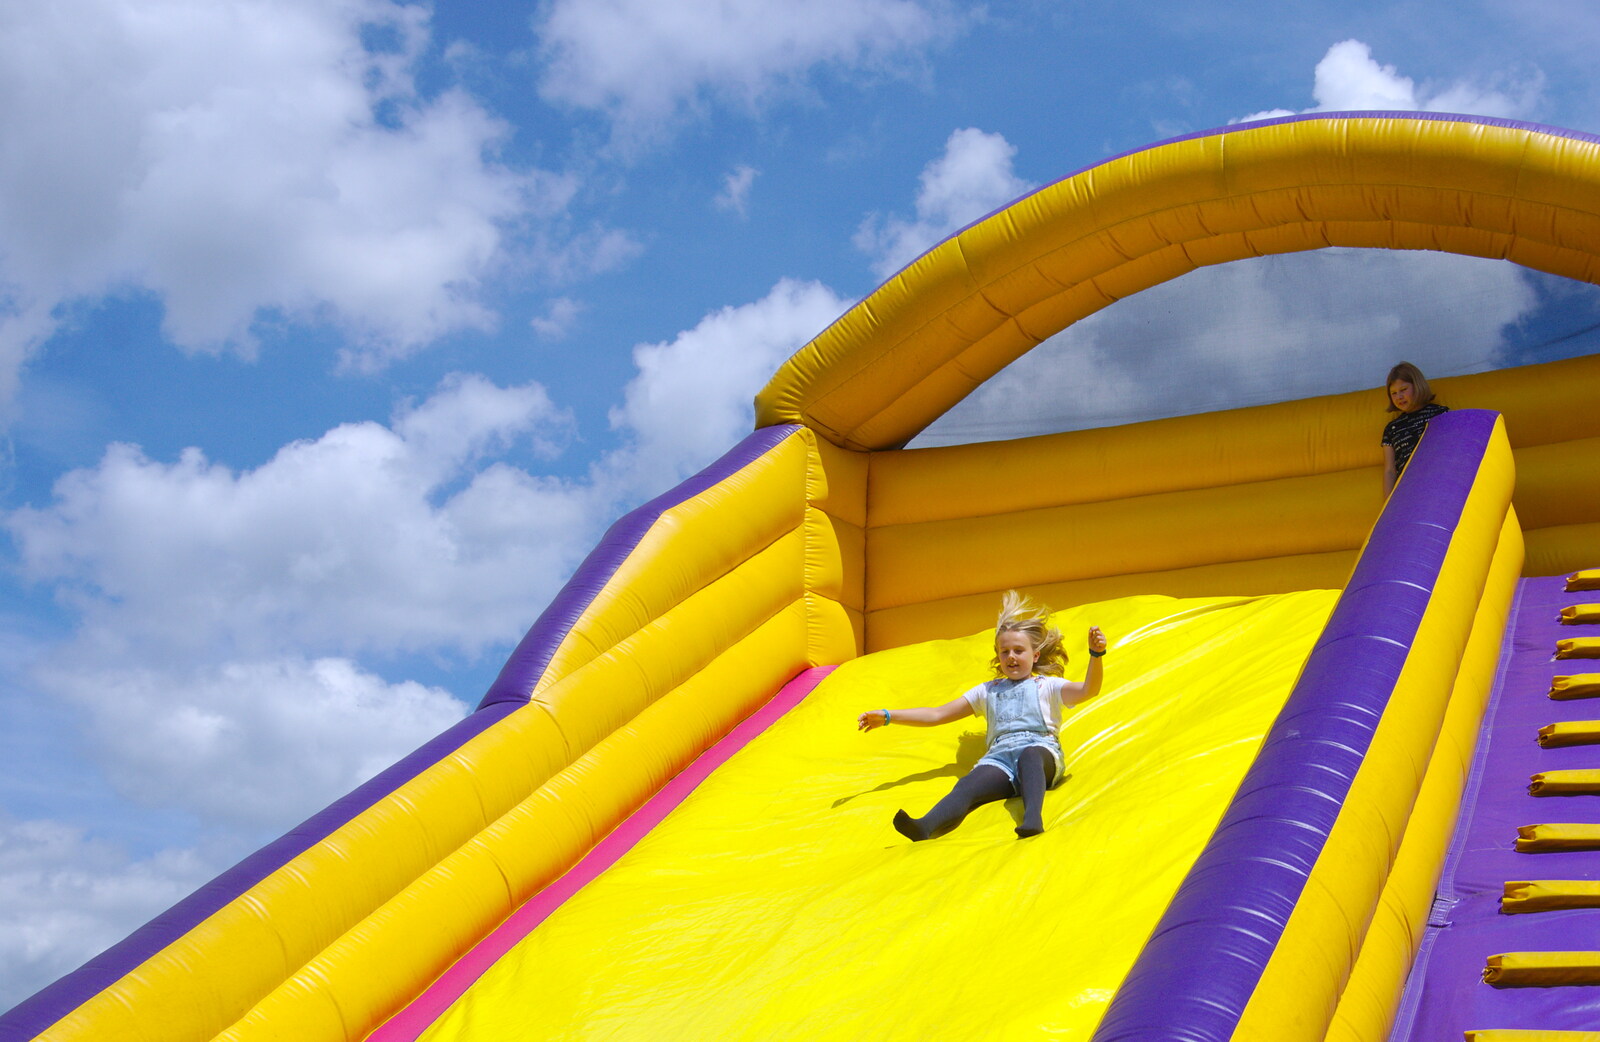 Alice is all hair as she hurtles down the slide from The Diss Carnival 2019, Diss, Norfolk - 9th June 2019